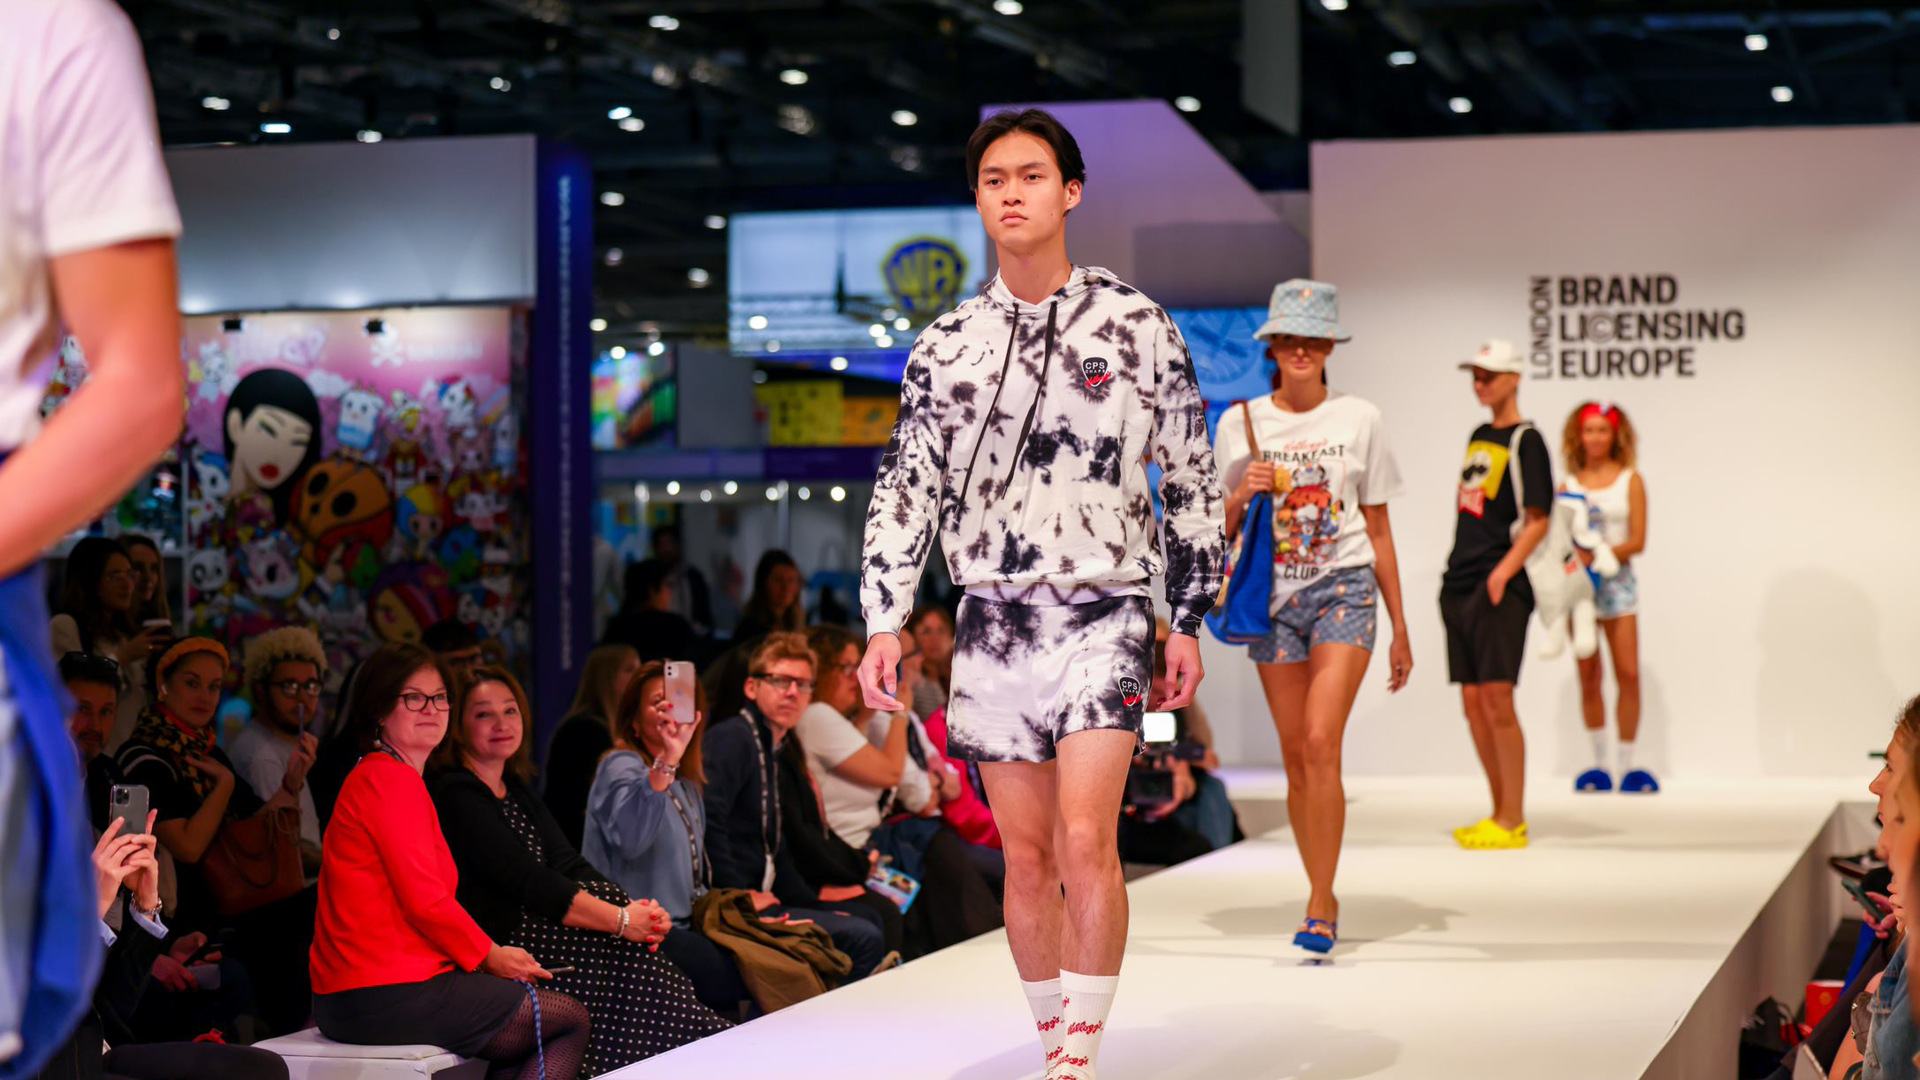 Hot off the catwalks: men's fashion enters the see now / buy now race